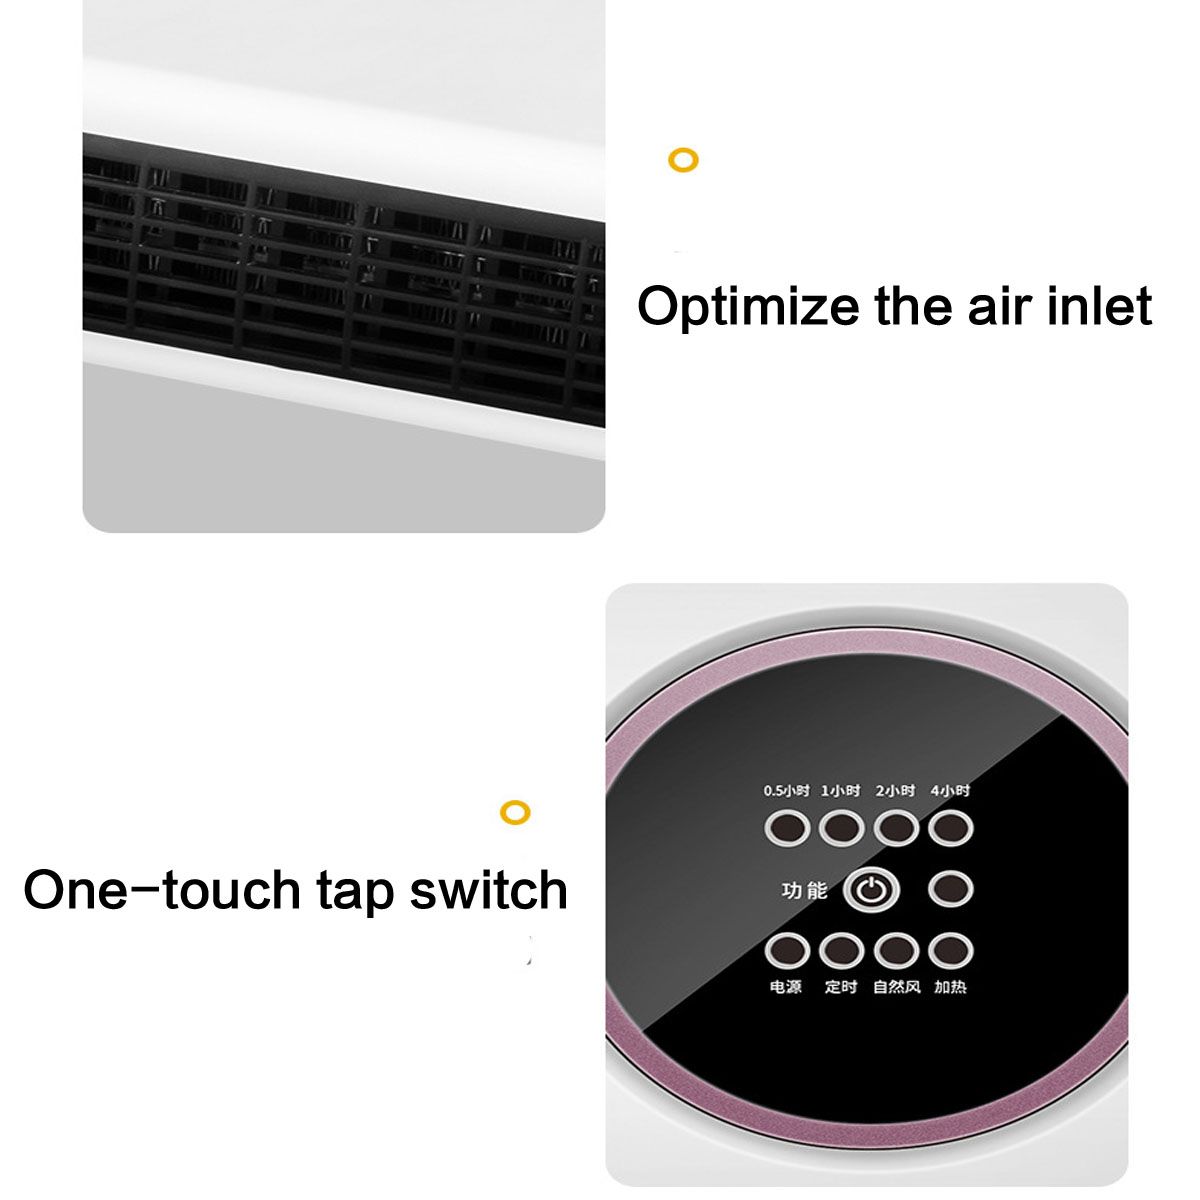 2000W-Electric-Timing-Wall-Mounted-Heater-Space-Heating-Air-Conditioner-W-Remote-1408861